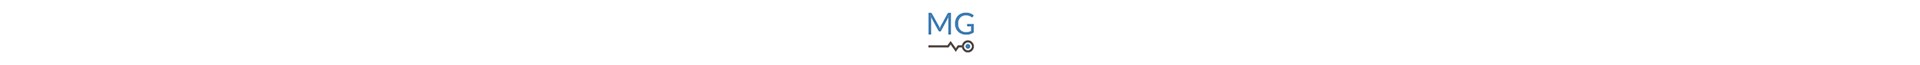 MG Energy Systems 